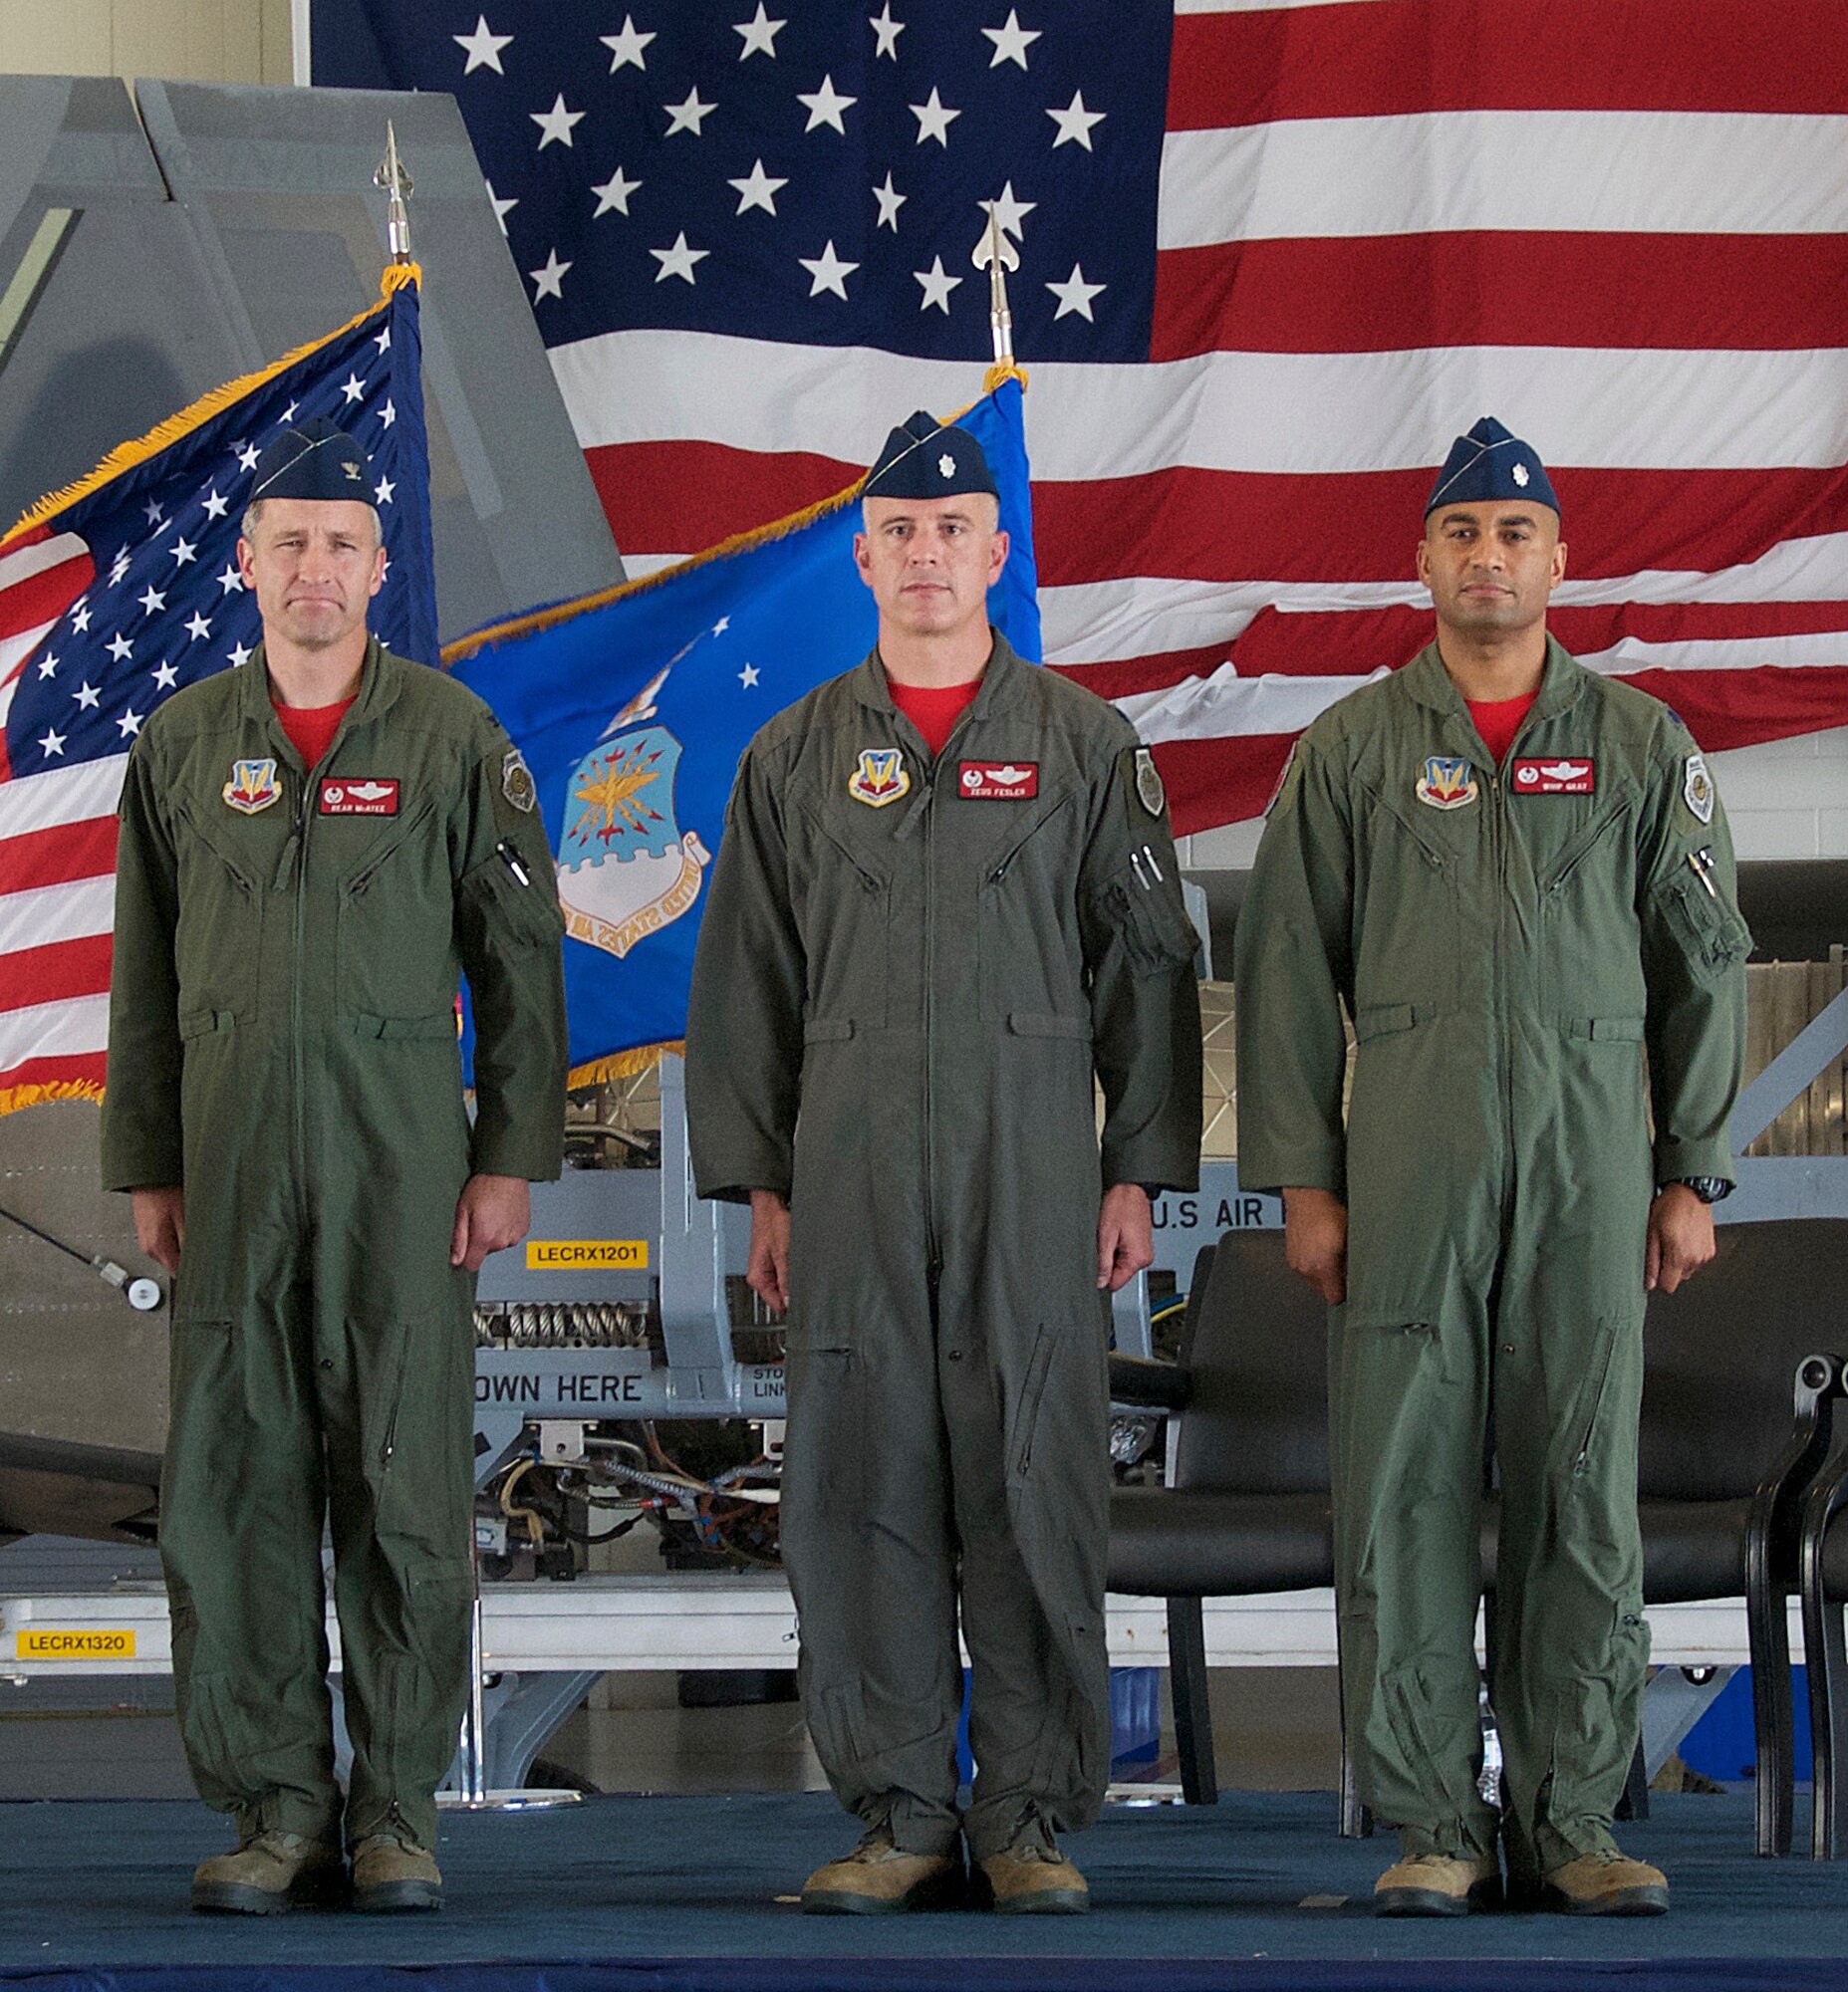 The 192nd Fighter Wing held a change of command ceremony for the 192nd FW Operations Group, here on June 12, 2016.  Lt. Col. Darren P. Gray assumed command of the 192nd Operations Group from Lt. Col. D. Micah Fesler, who was selected for a National Security Fellowship at Harvard in Boston, Mass. (U.S. Air National Guard photo by Master Sgt. C. Claudio)